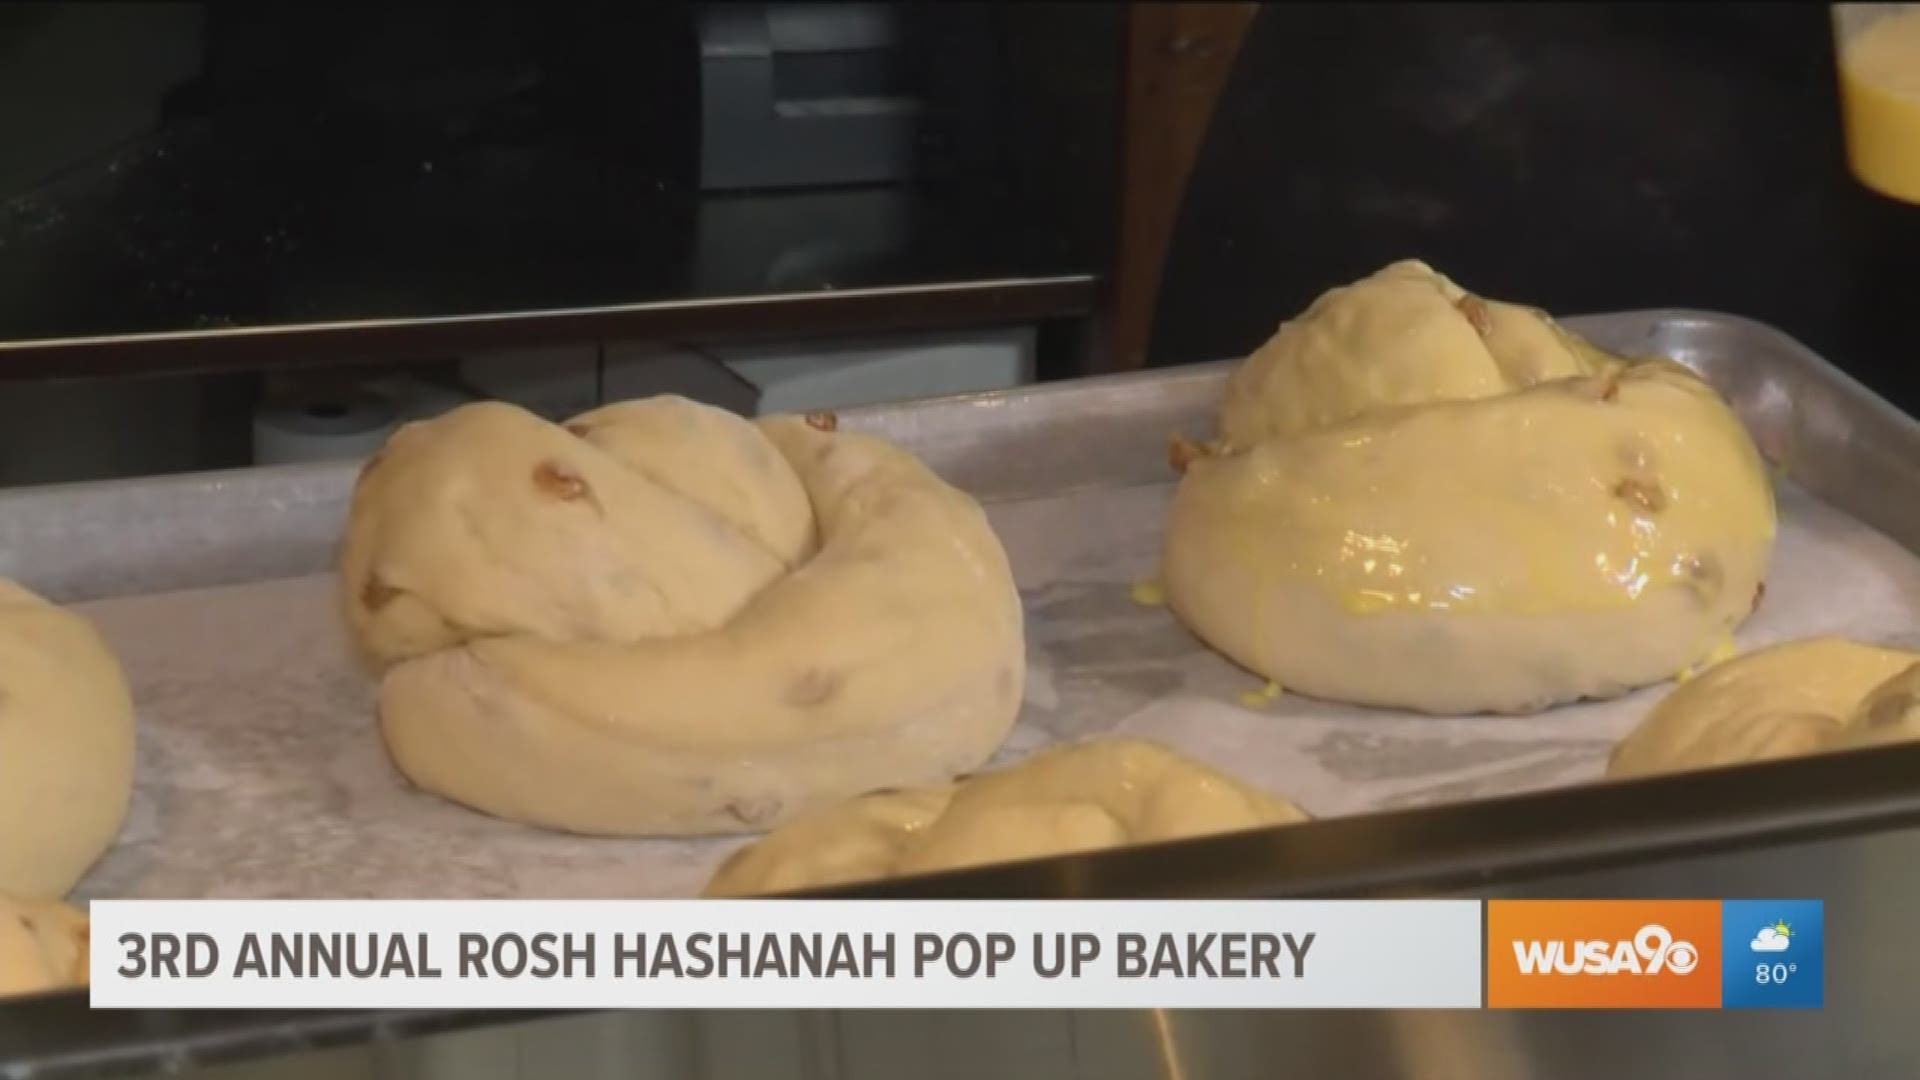 The 3rd annual Rosh Hashanah pop-up bakery with Chef Alex Levin is underway and Andi learns how he makes some of his tasty treats. 